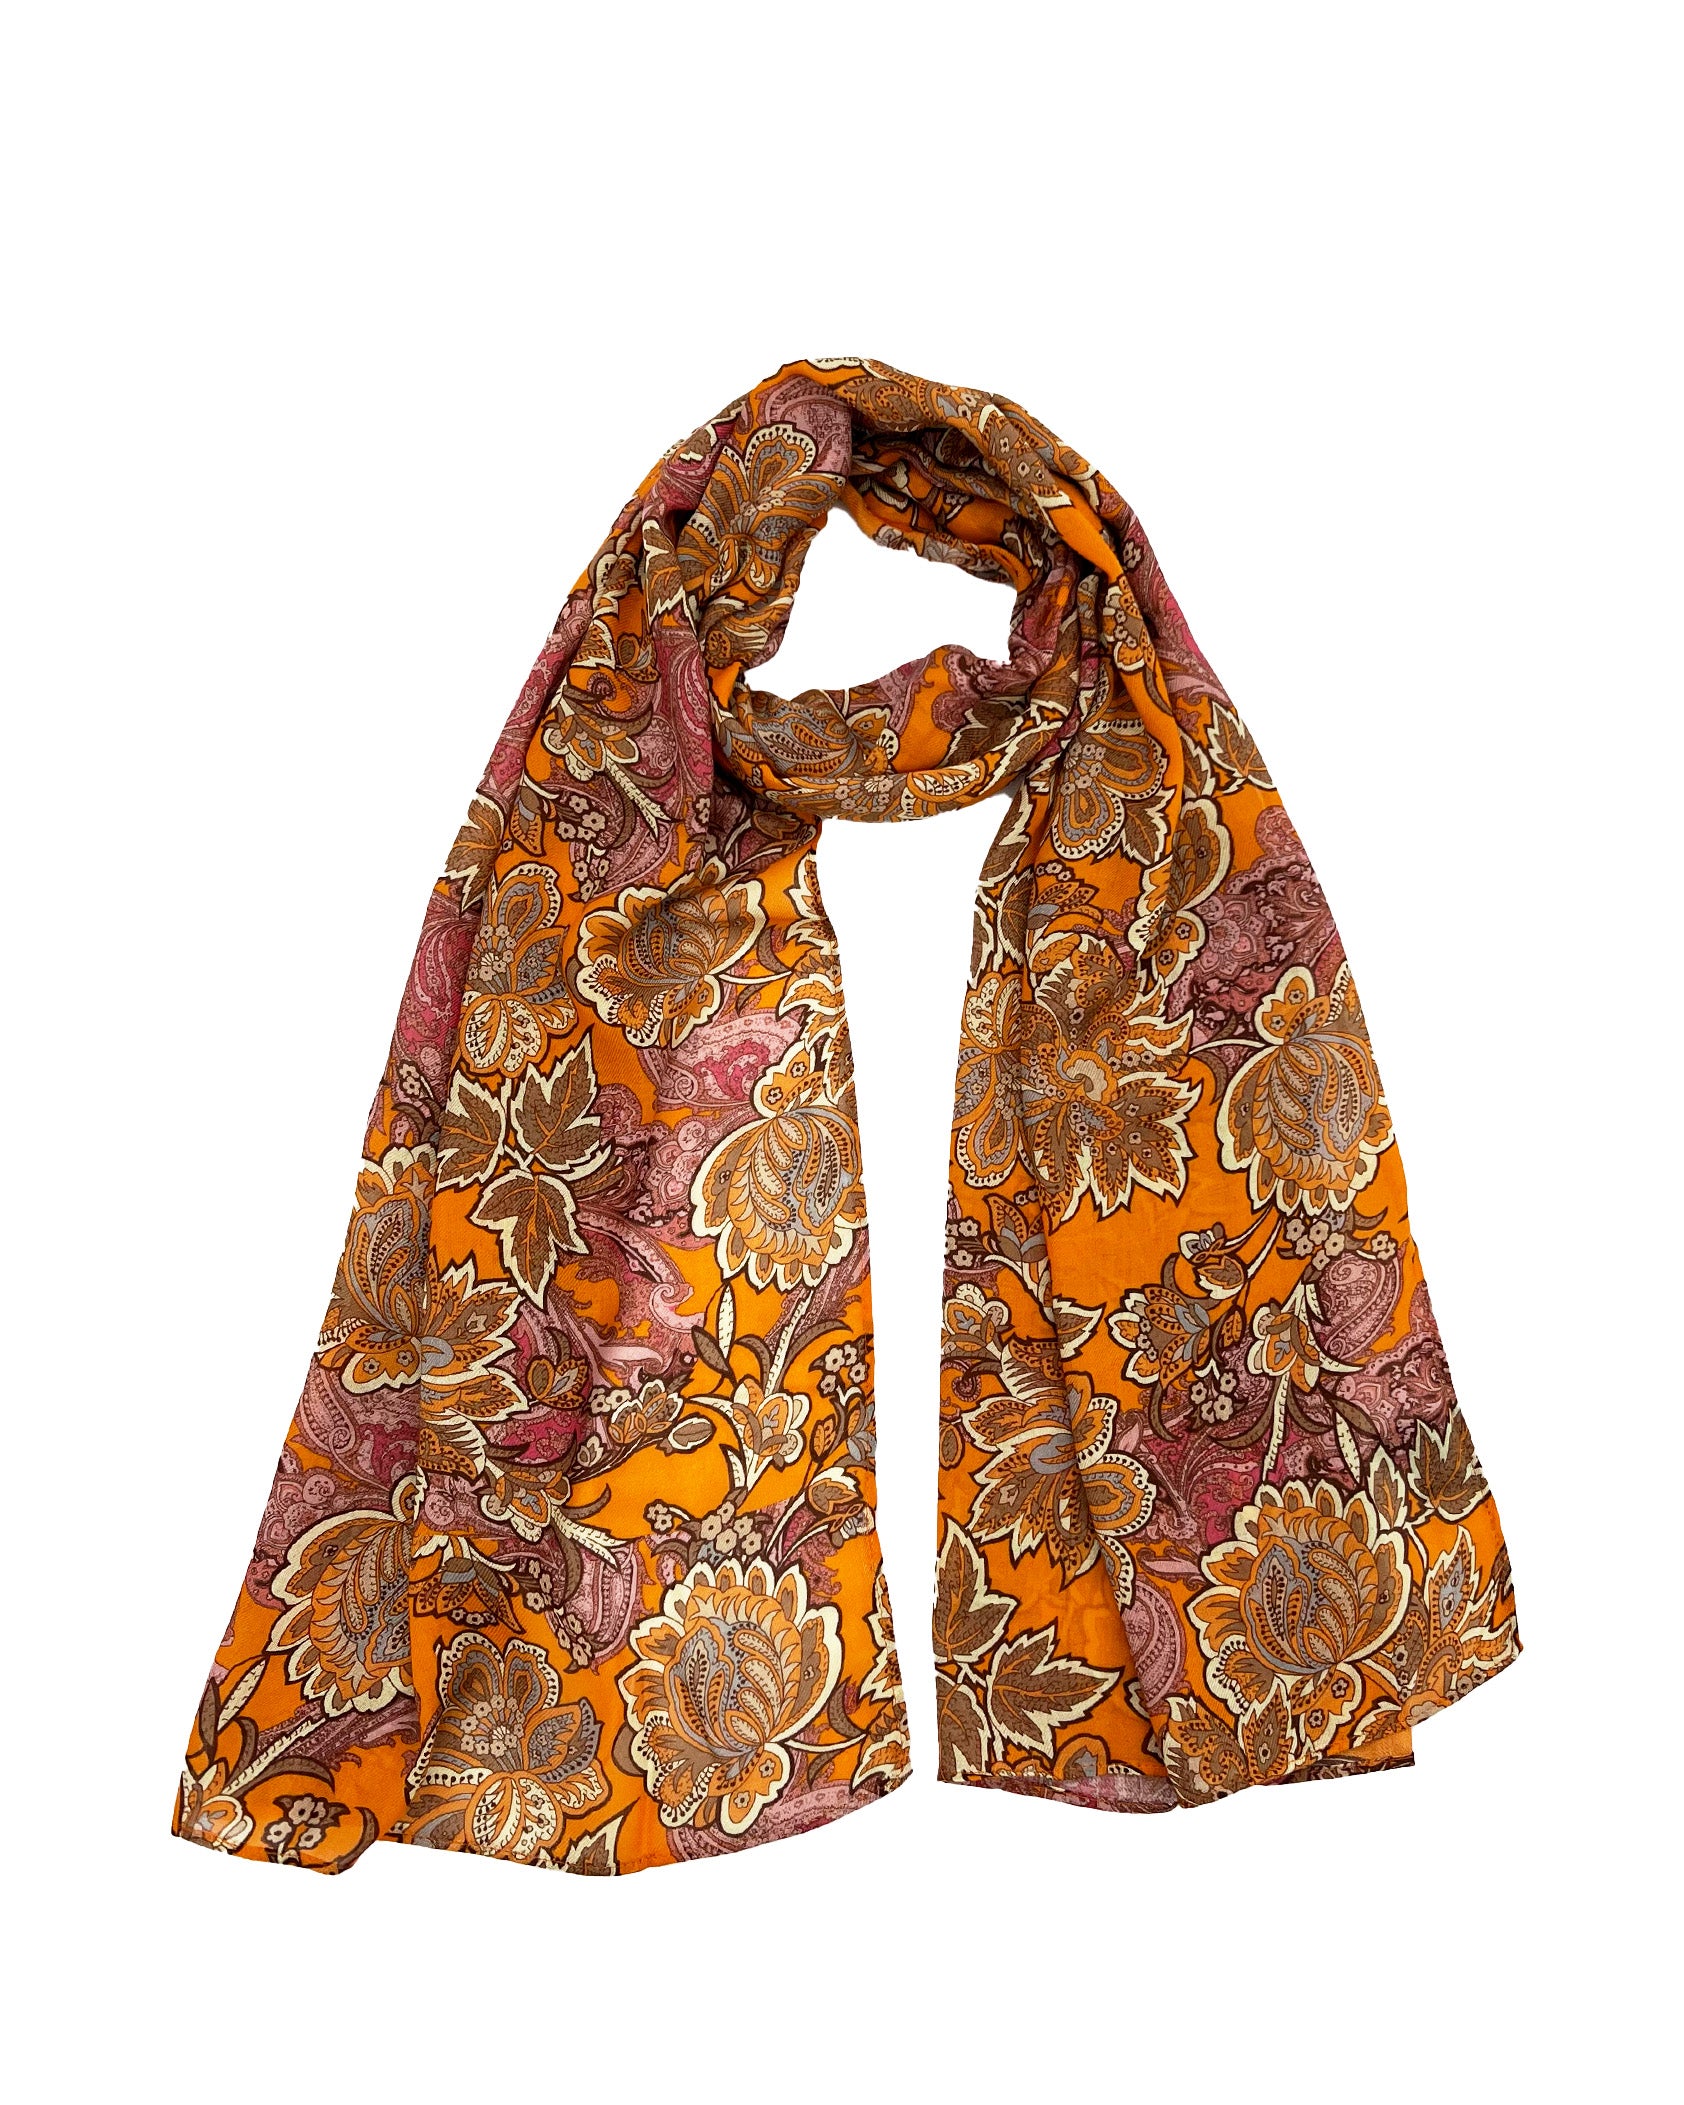 The Niagra wide scarf unravelled and looped in the middle, demonstrating the considerable length and showing large orange and pink floral patterns.